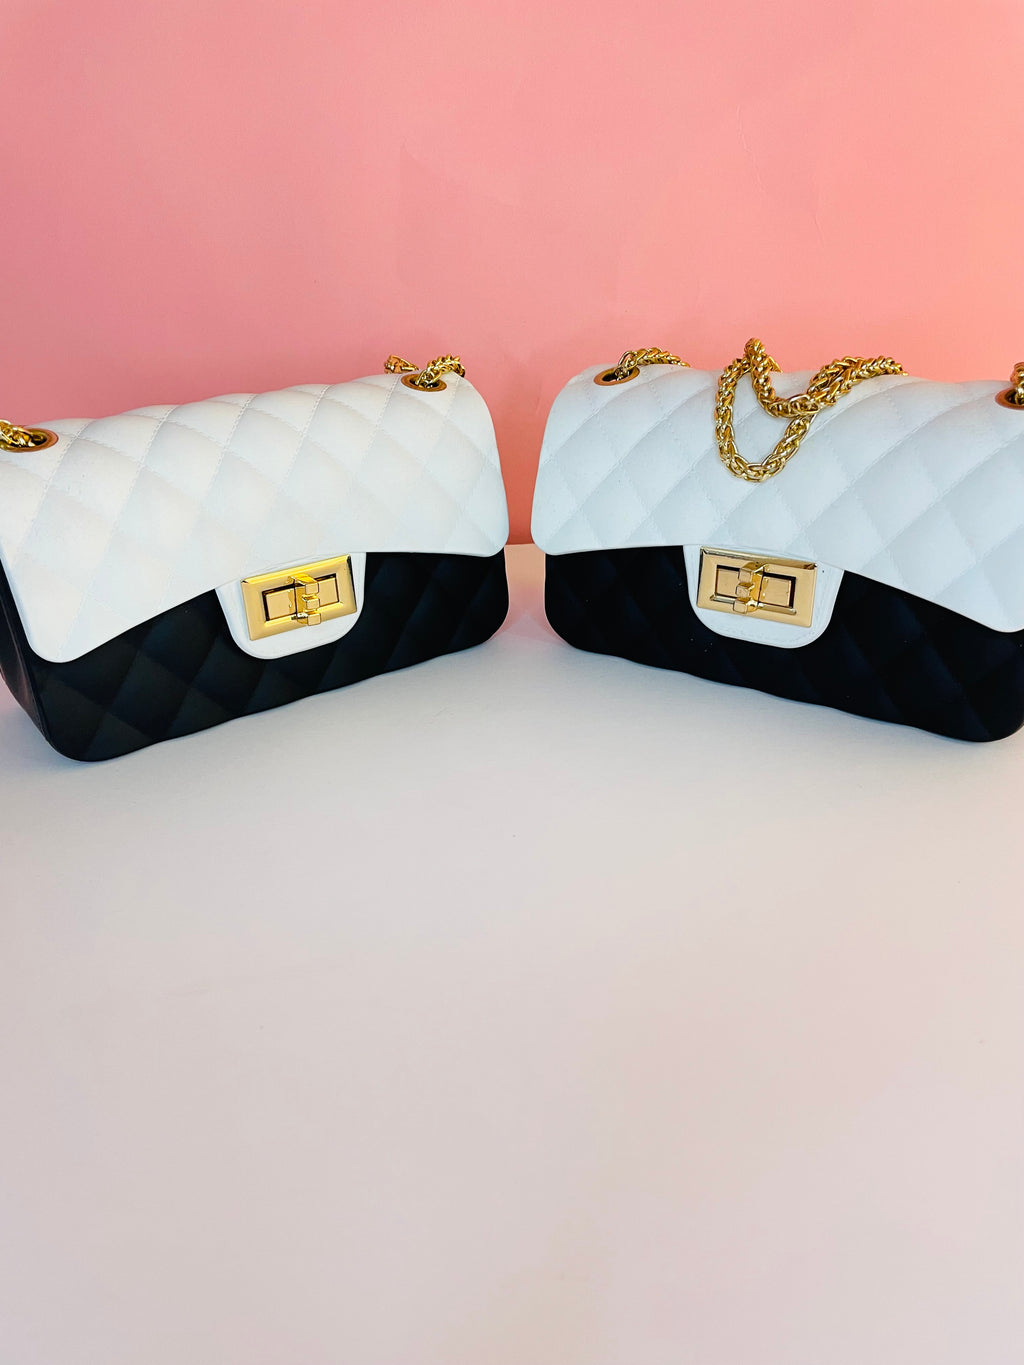 Small black and white jelly swing handbag with gold chain straps, gold hardware turn lock closure